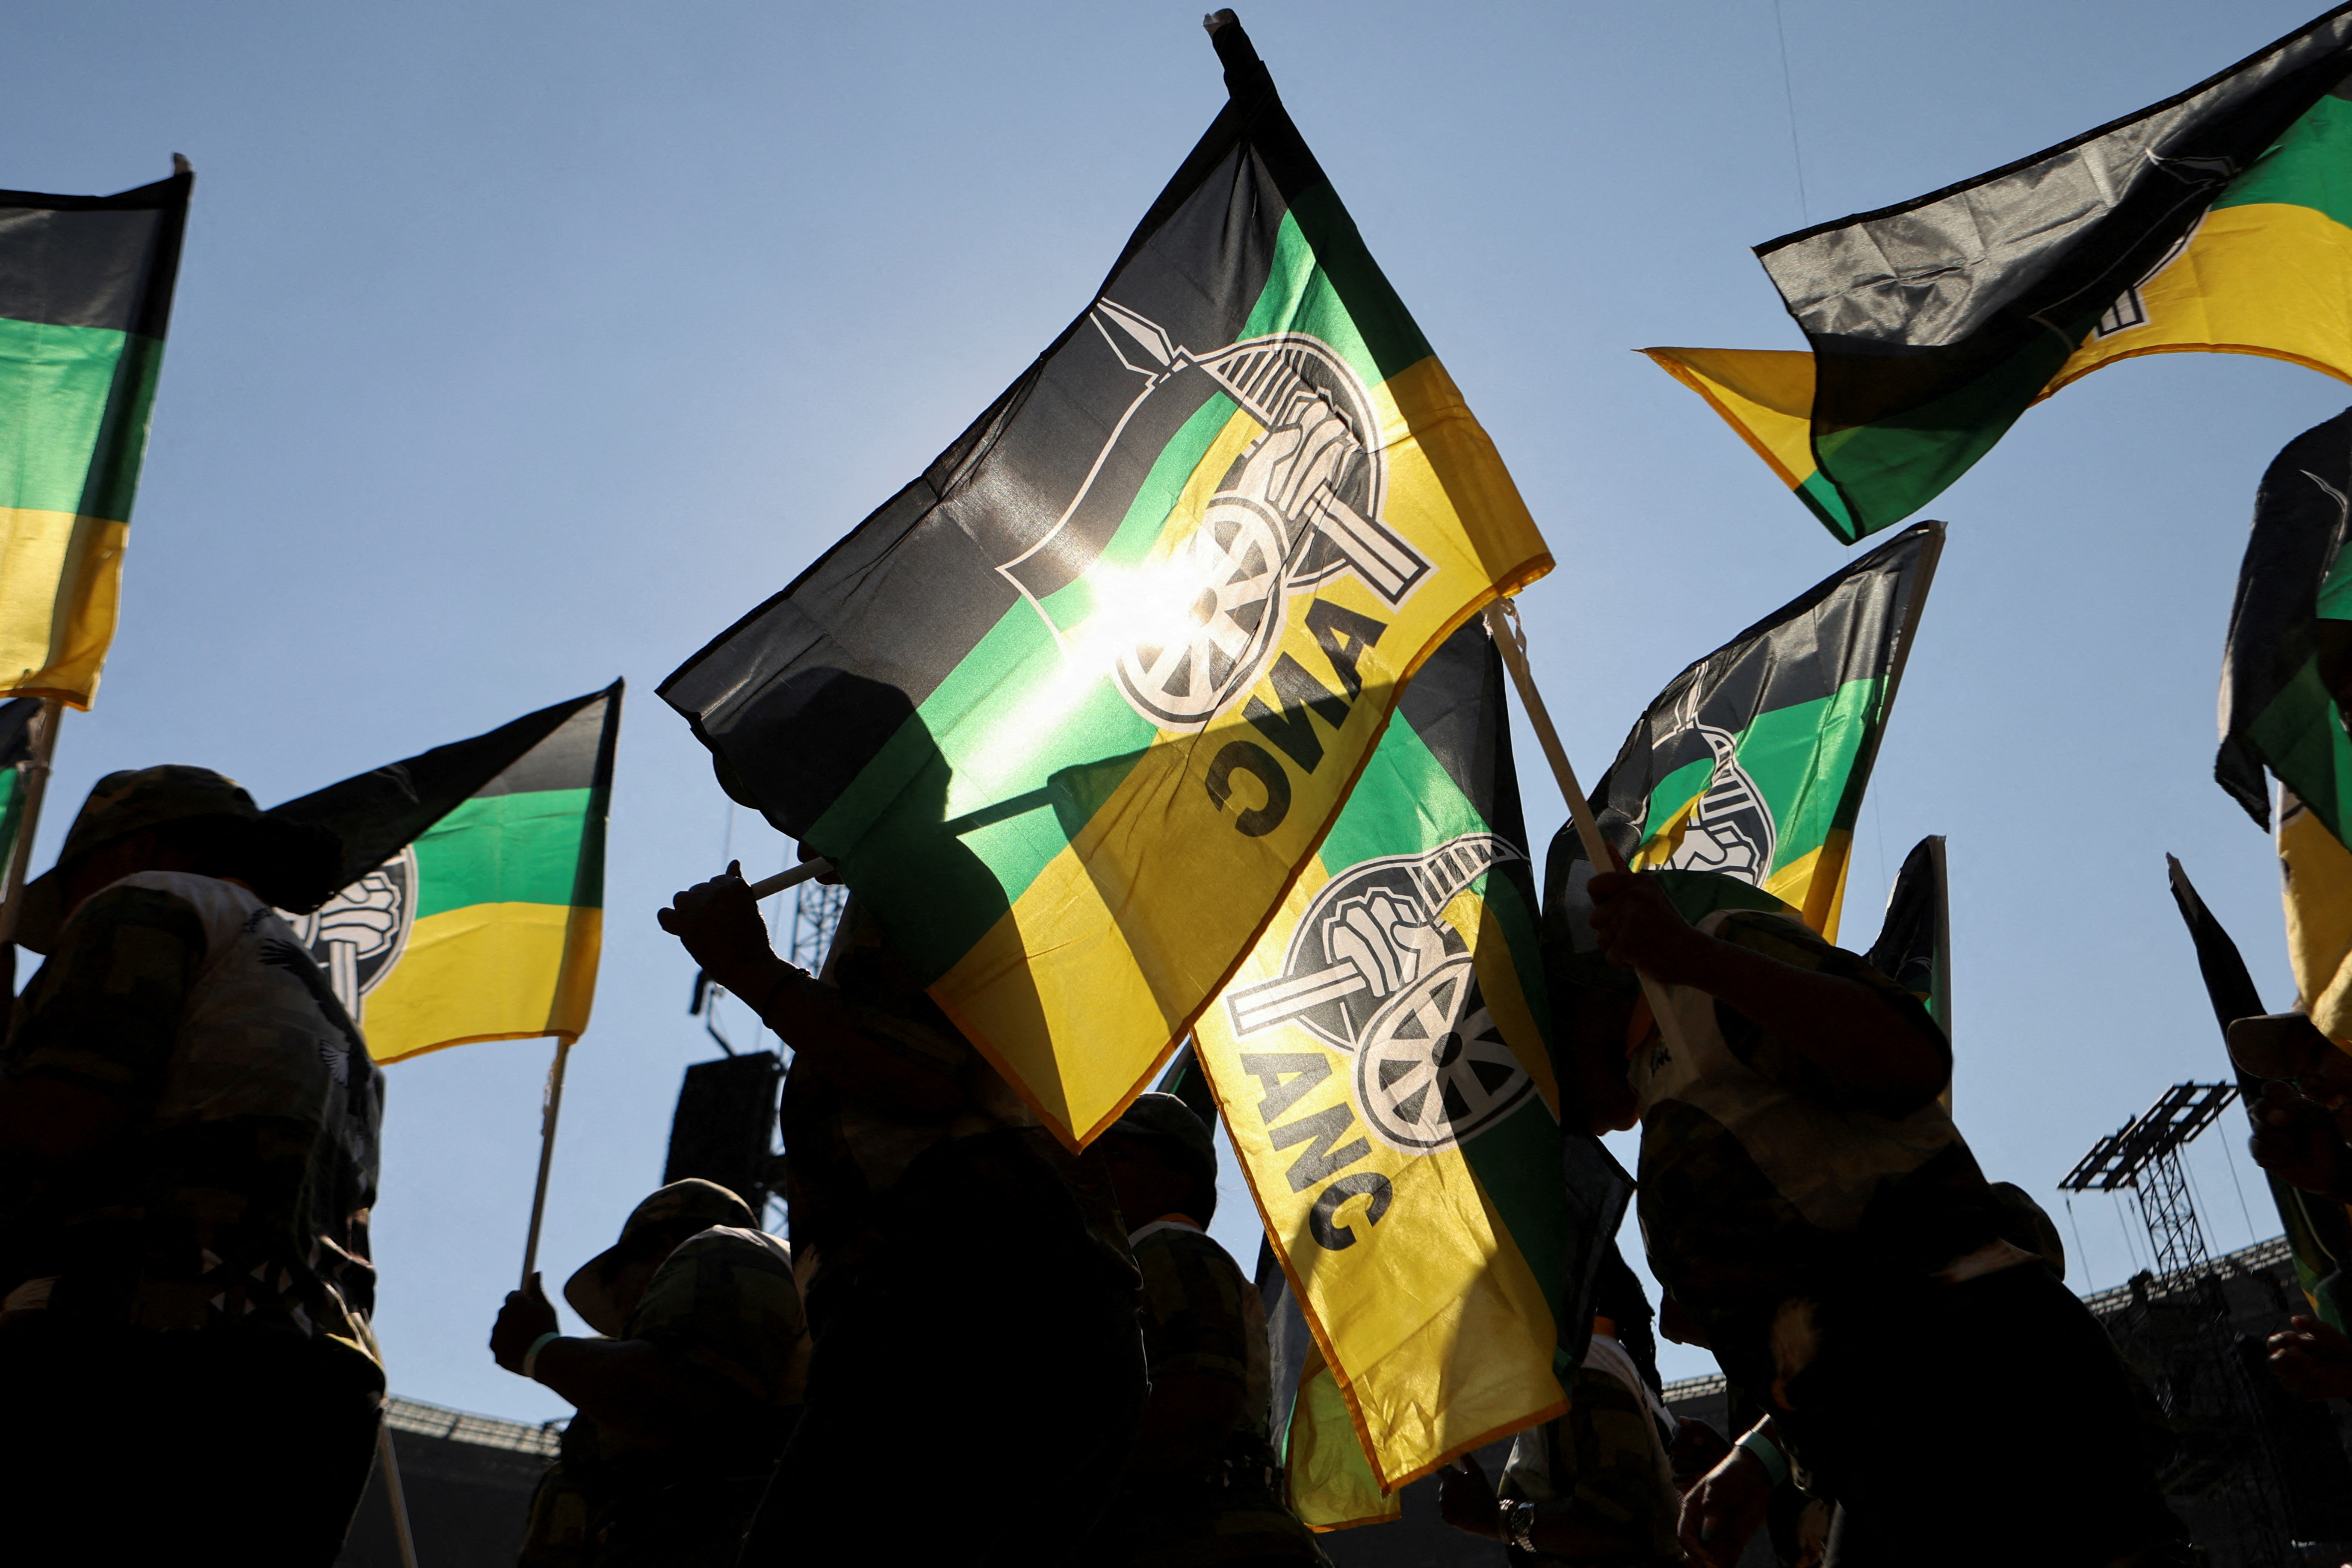 President of the ANC Cyril Ramaphosa attends a rally ahead of the upcoming election at FNB stadium in Johannesburg